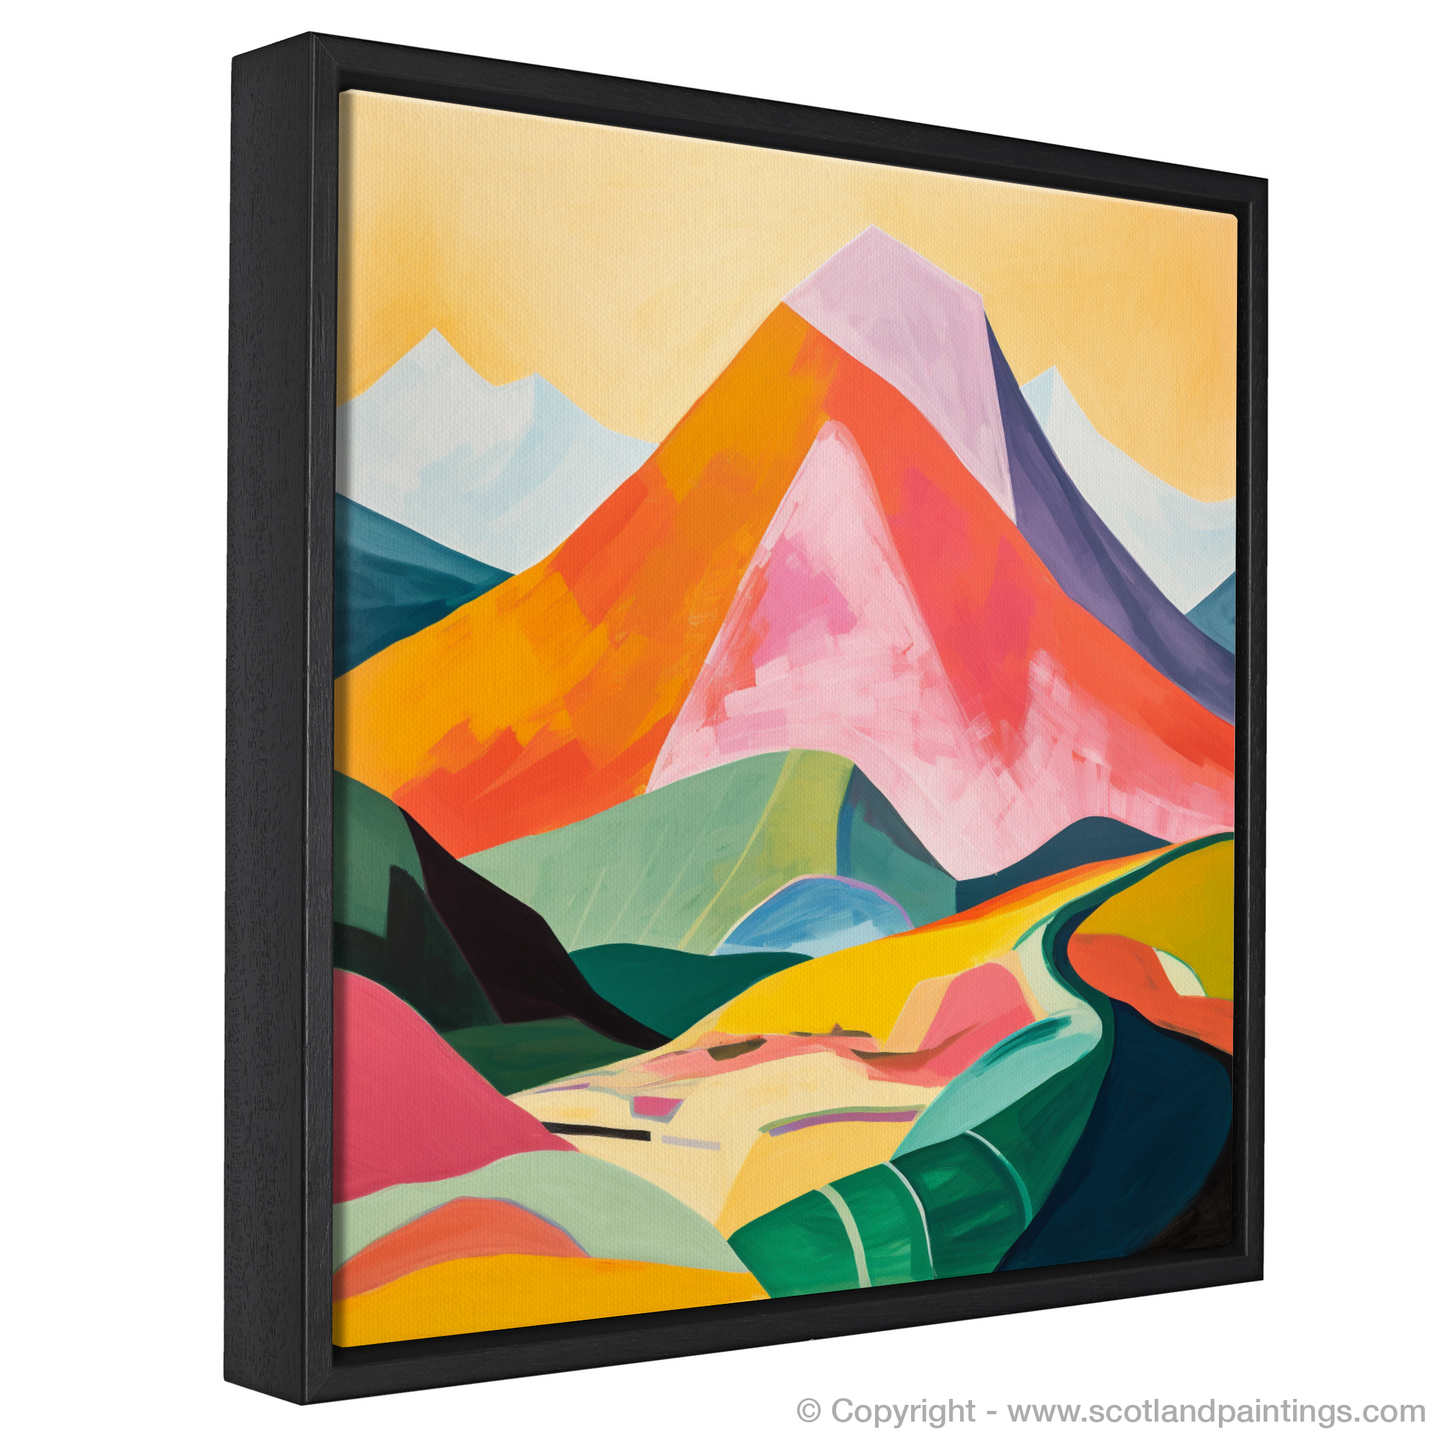 Painting and Art Print of Stob Binnein entitled "Abstract Highland Symphony: Stob Binnein Reimagined".